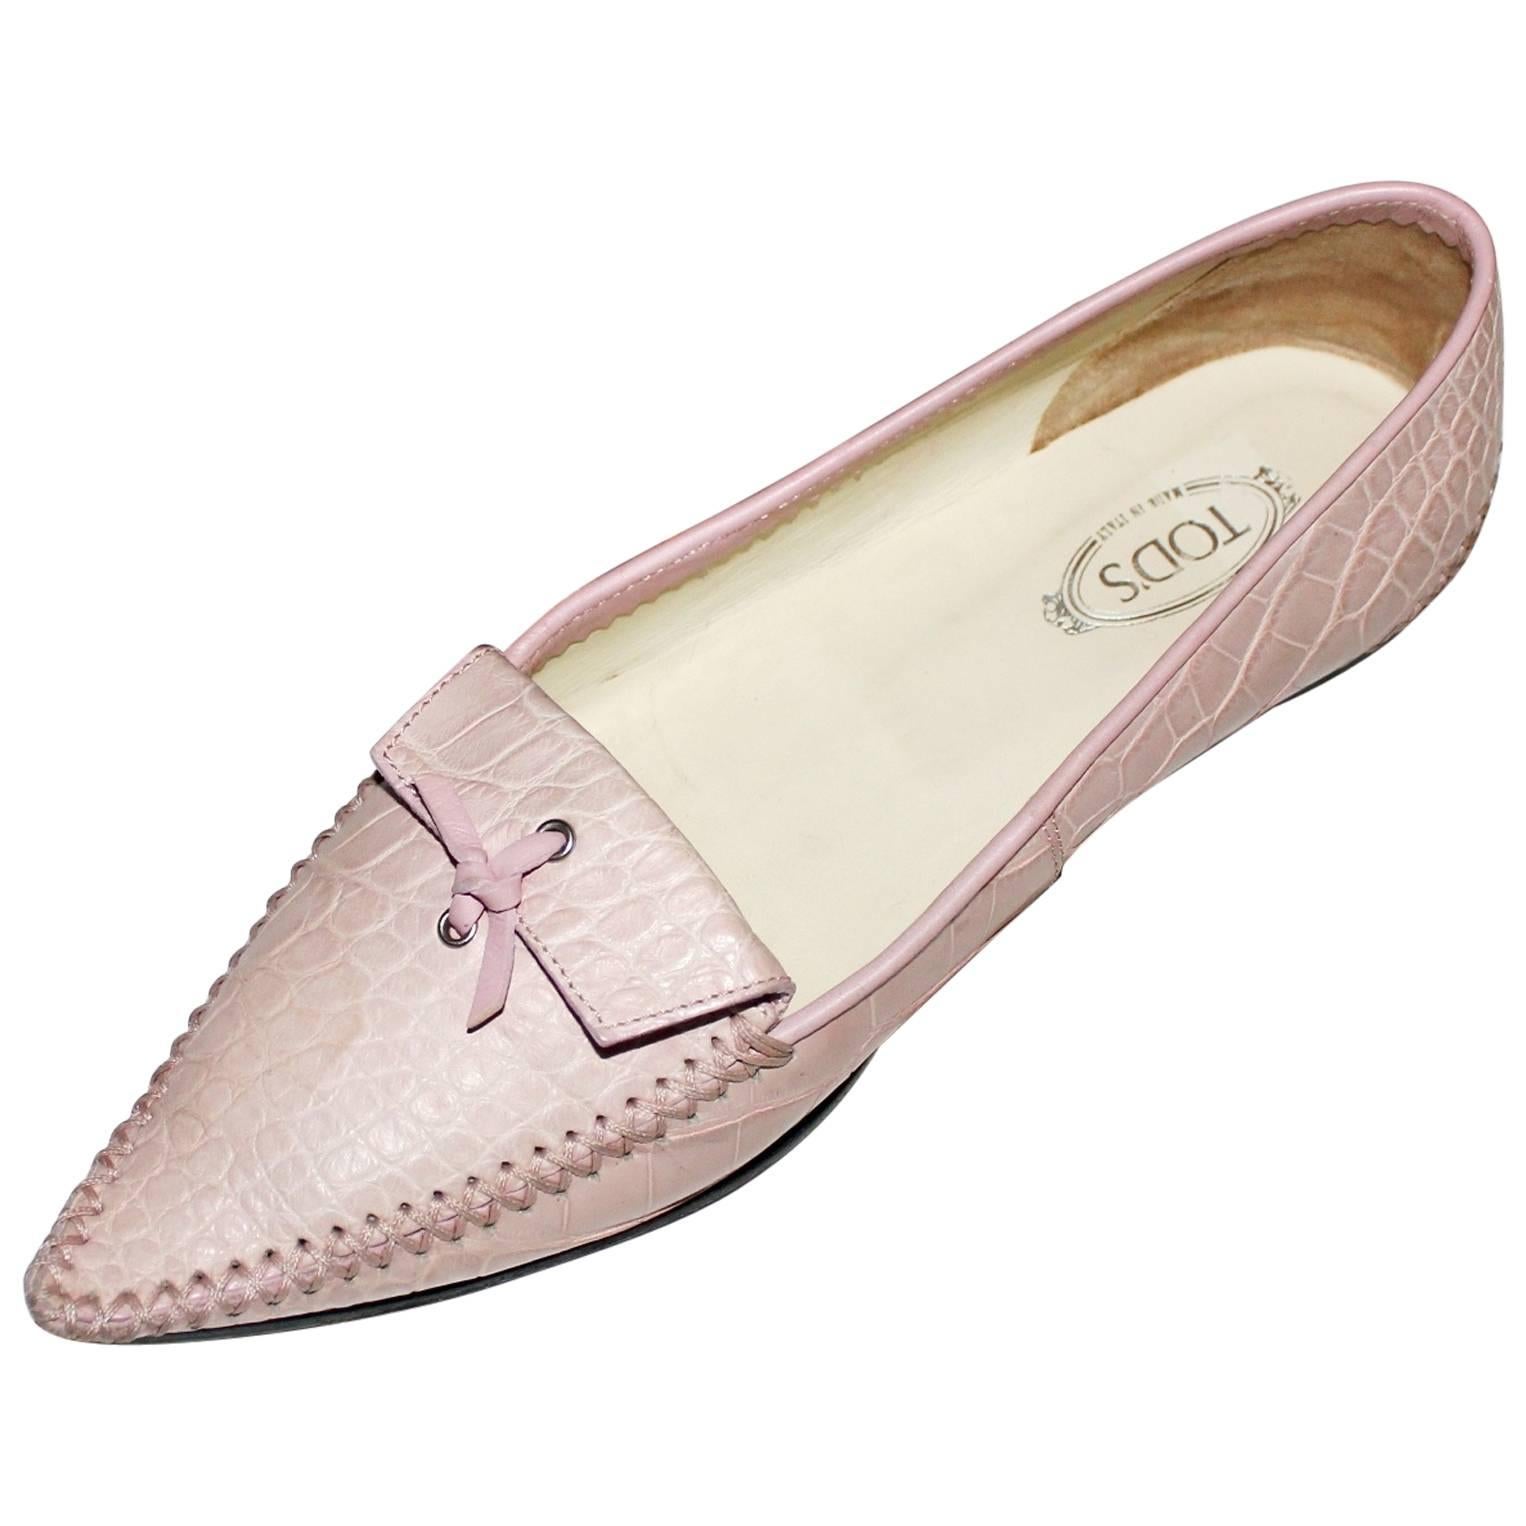 AMAZING TOD'S ALLIGATOR CROCODILE SKIN MOCCASINS

RARE FIND - stunnig piece from Tod's exotic collection

DETAILS: 

A signature piece that will last you for years
Pure luxury
Beautiful soft pink exotic skin crocodile leather - no print
Welt-sewn